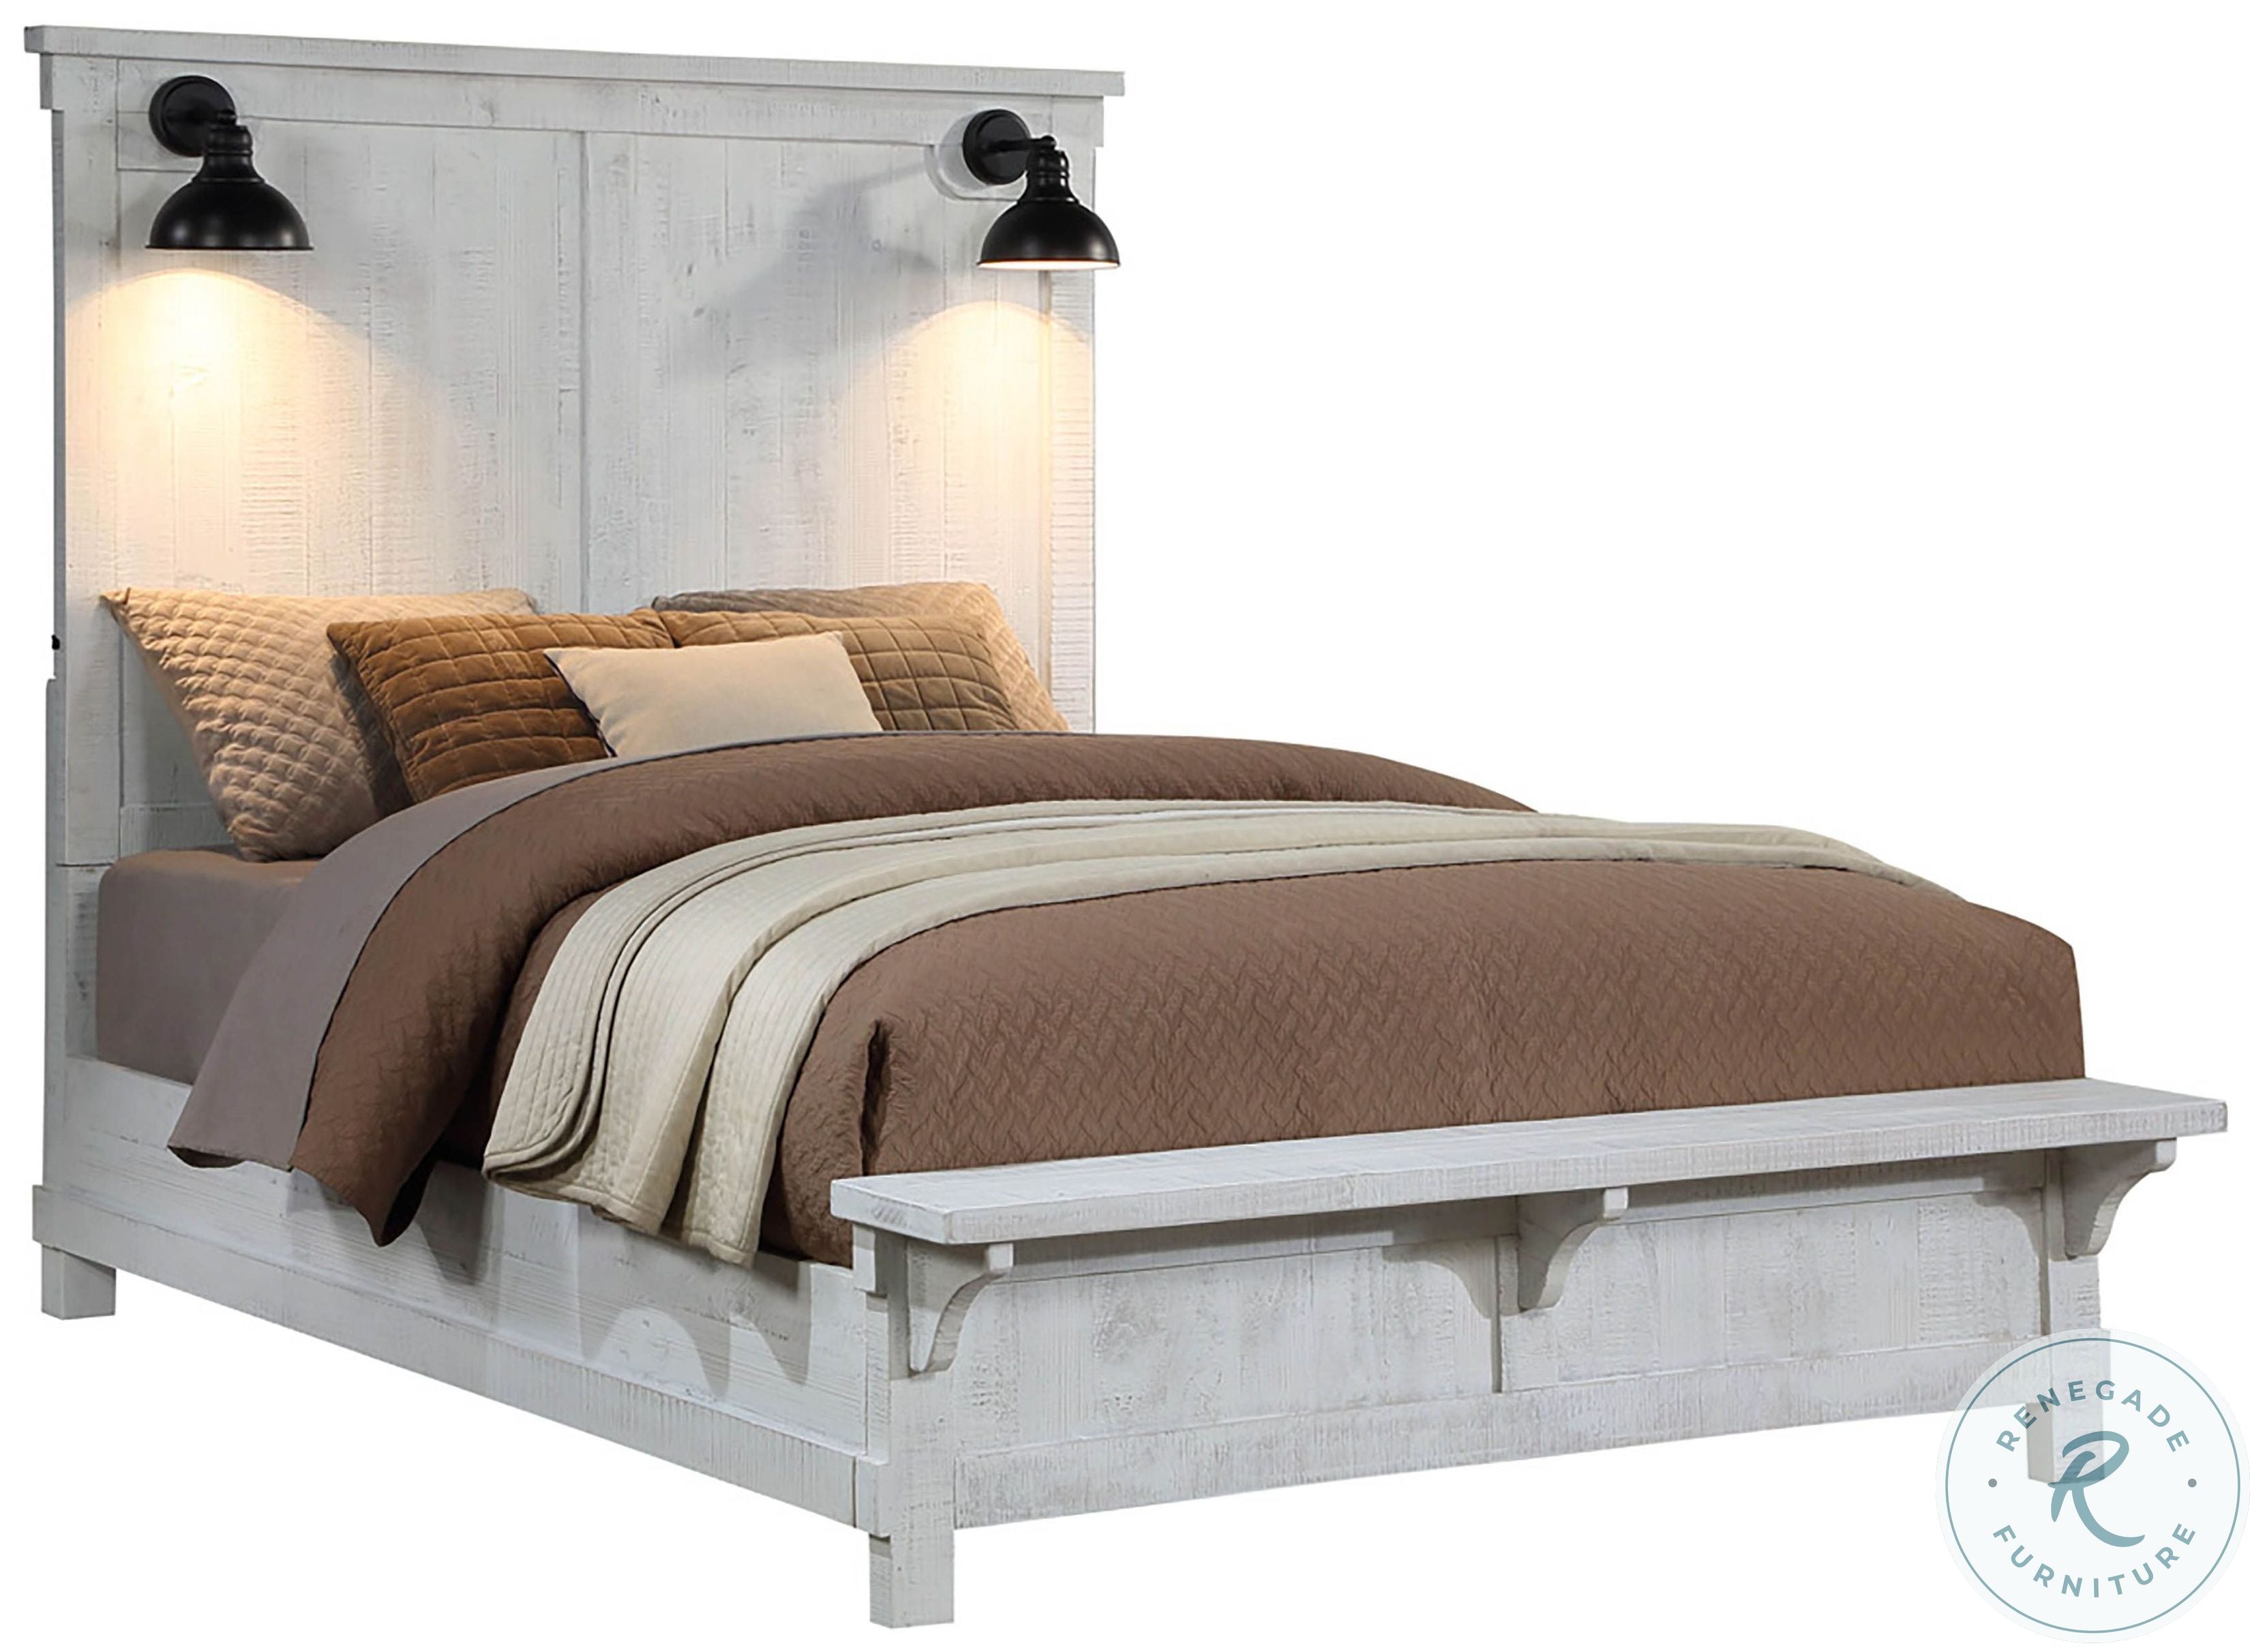 Farmhouse Distressed White King Panel Bed with Bench Footboard by Avalon Furniture